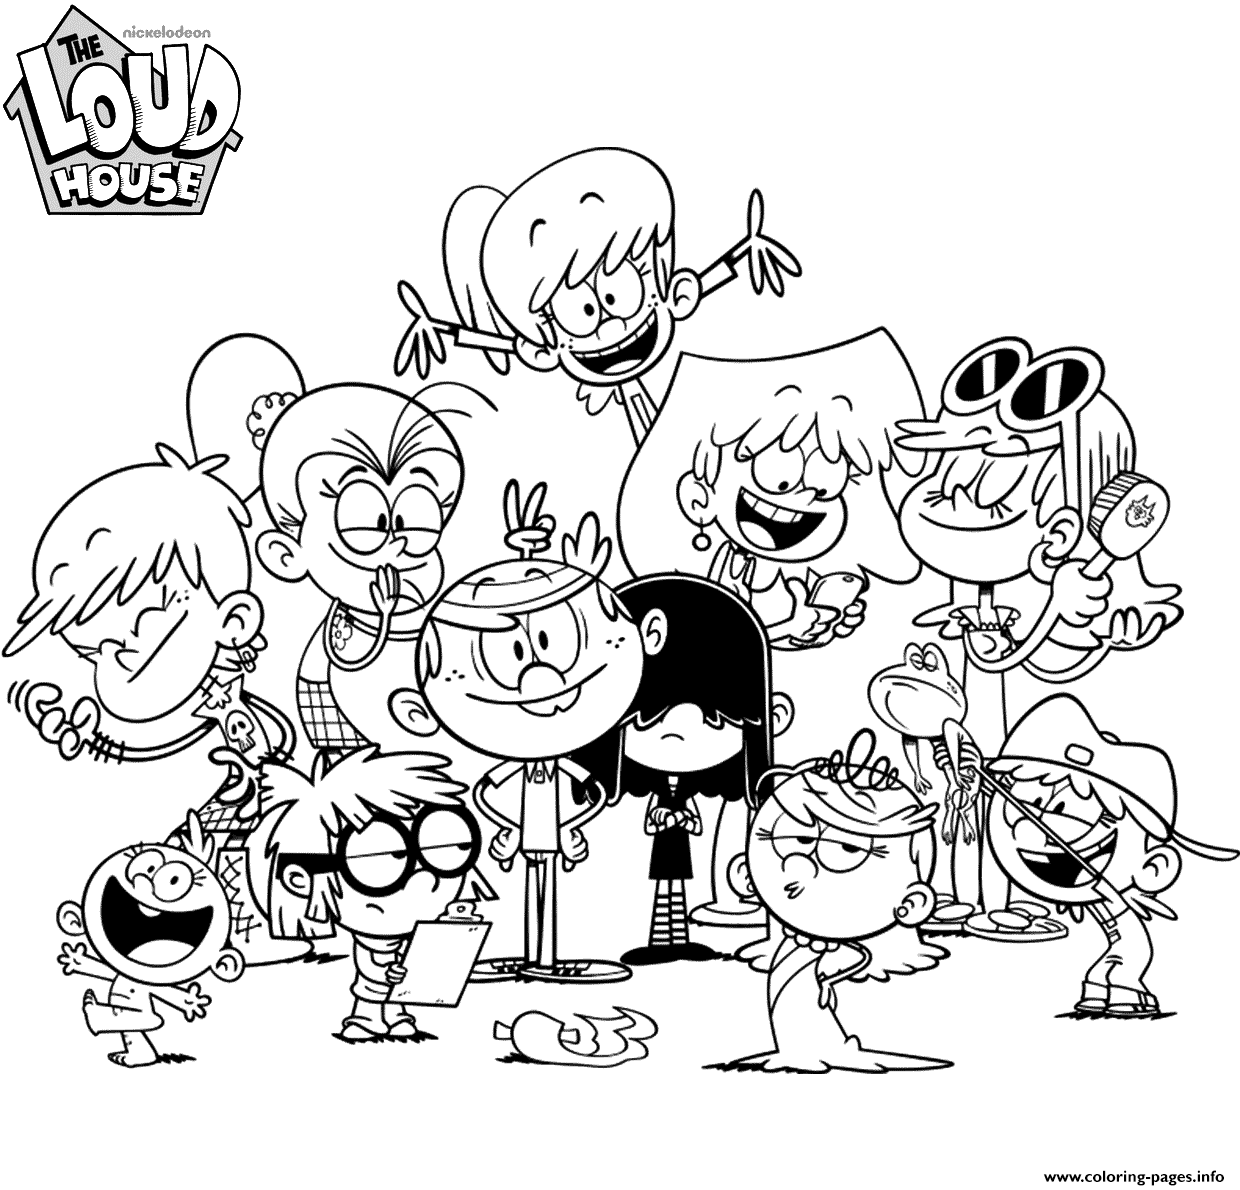 12+ Awesome The Loud House Coloring